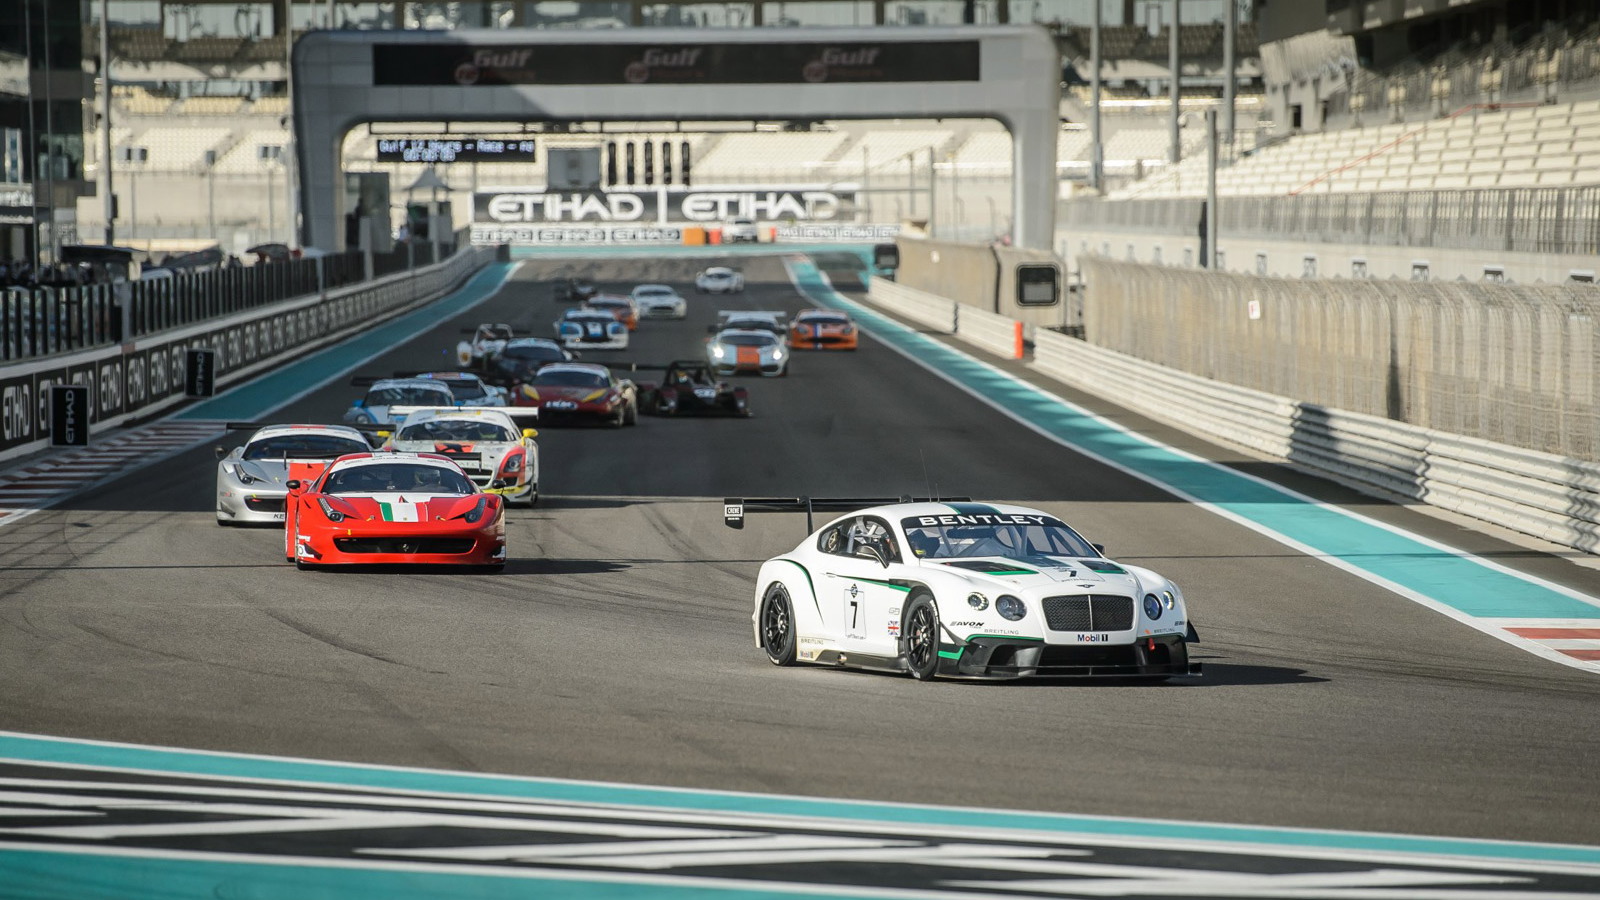 2014 Bentley Continental GT3 at the 2013 Gulf 12 Hours of Abu Dhabi